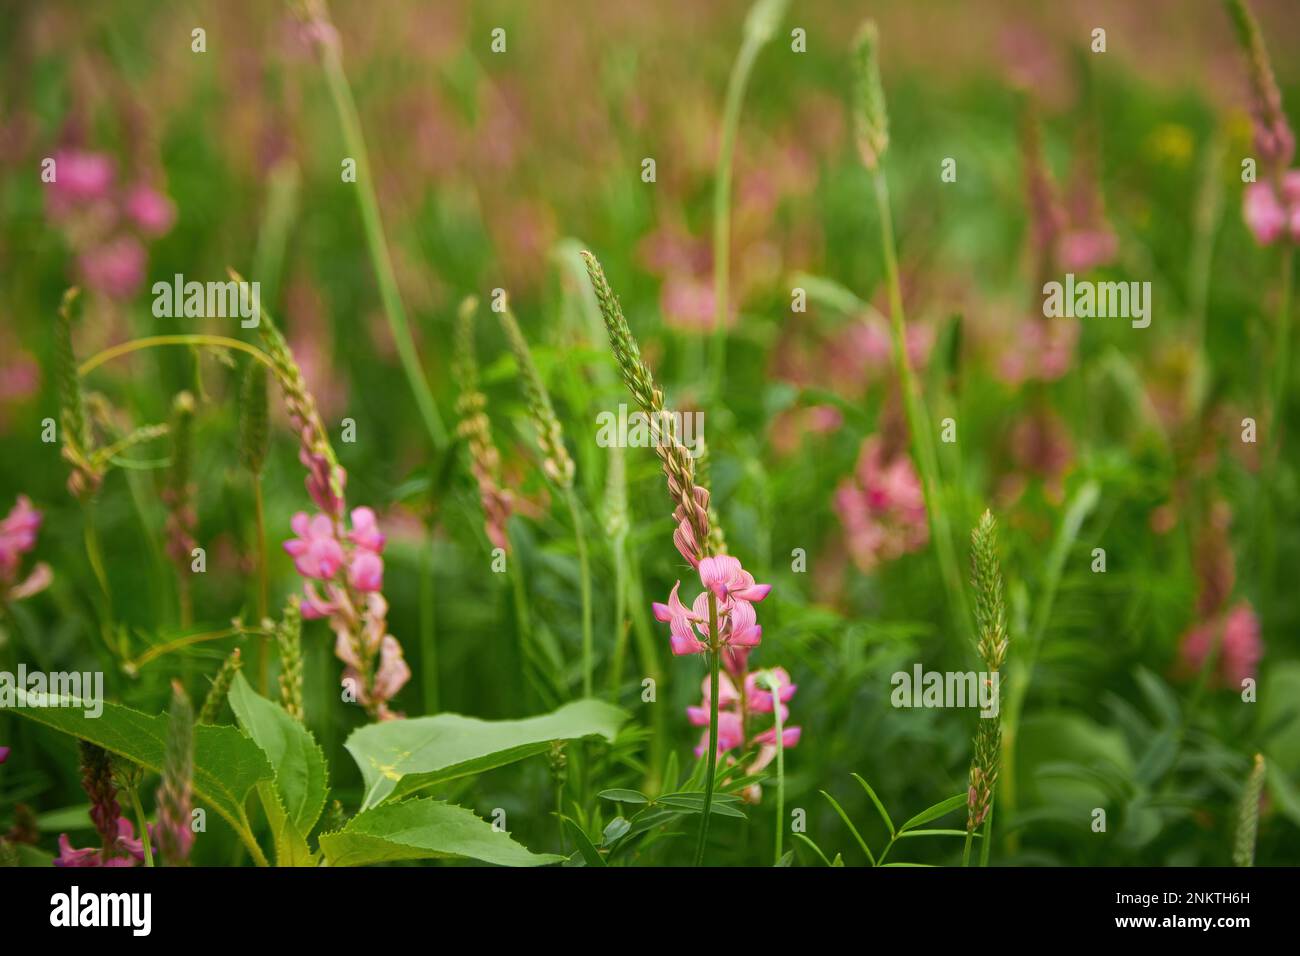 Sainfoin Onobrychis viciifolia growing in the grassland. Common sainfoin fowering in summer Stock Photo